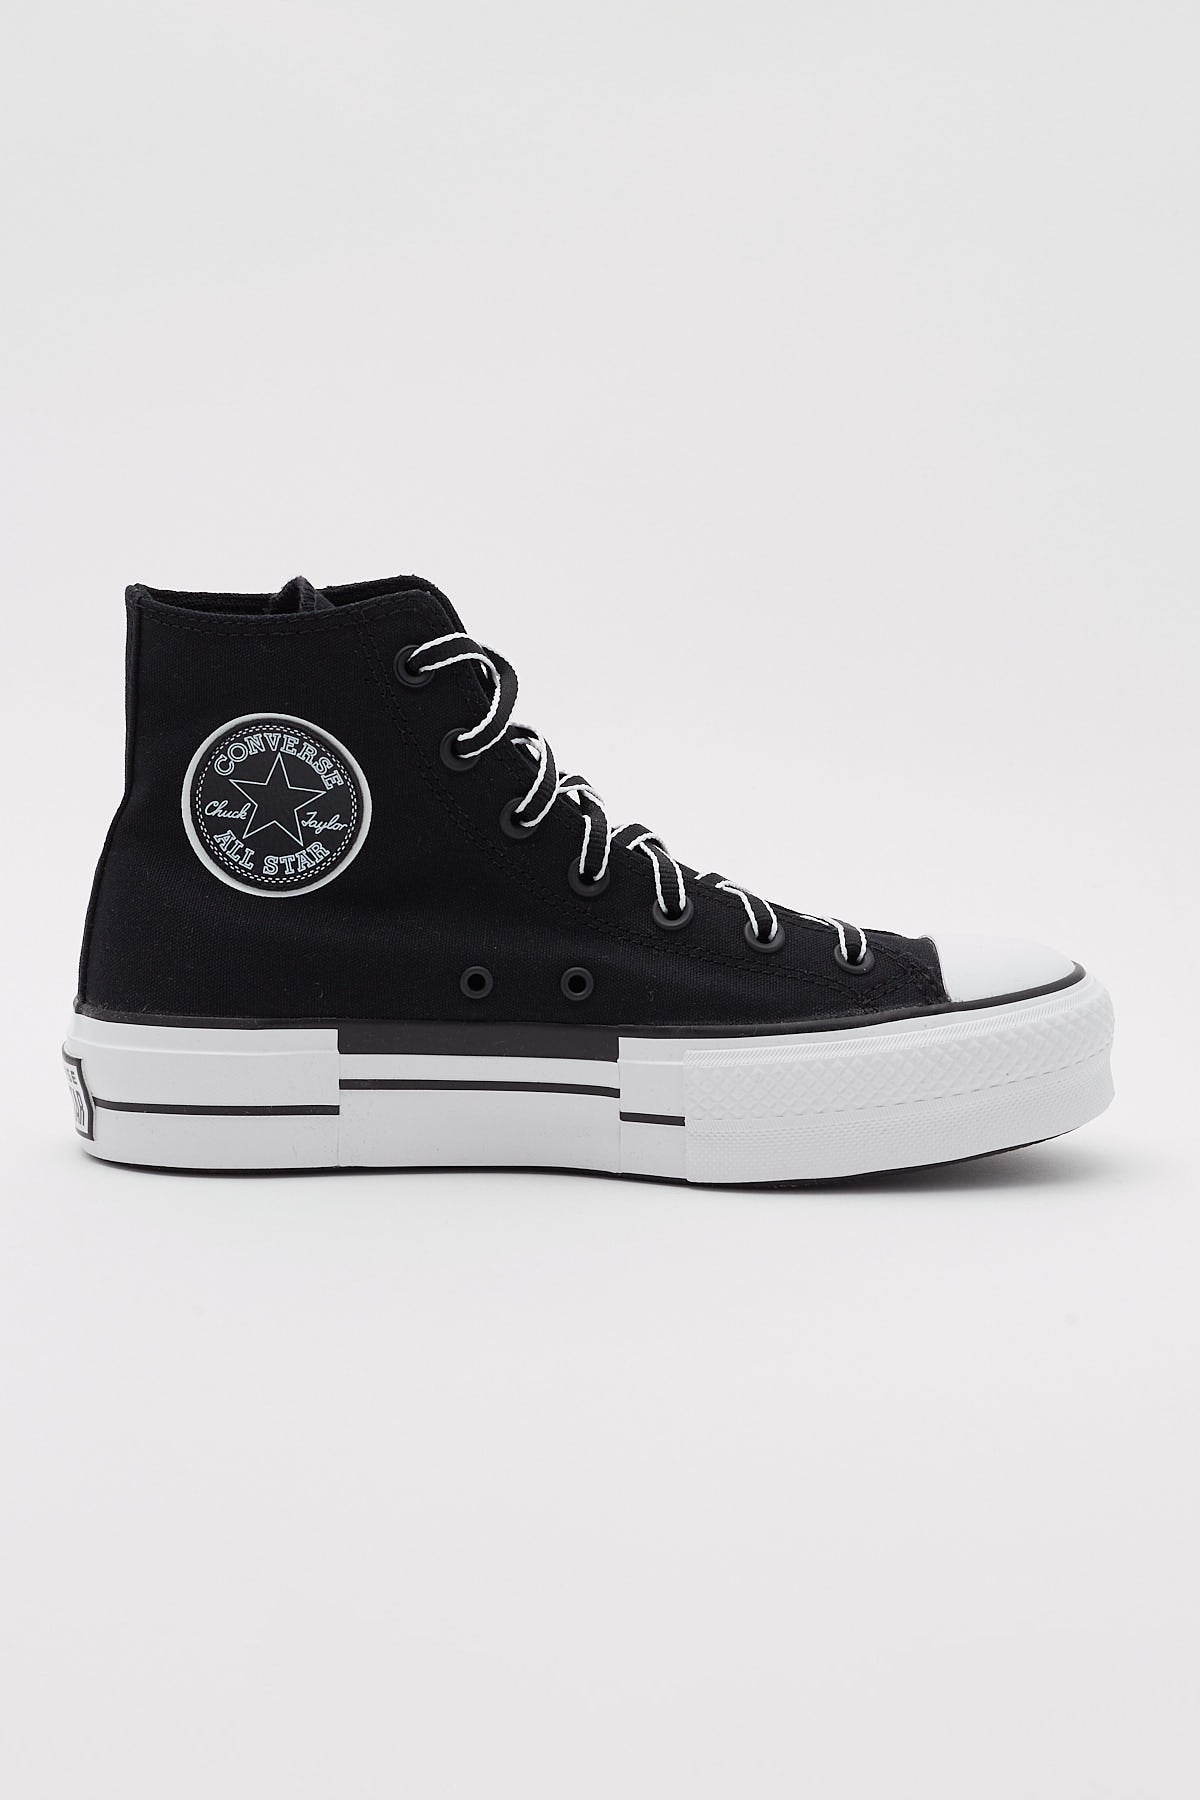 Converse CT Lift Outline Sketch Black / White – Universal Store